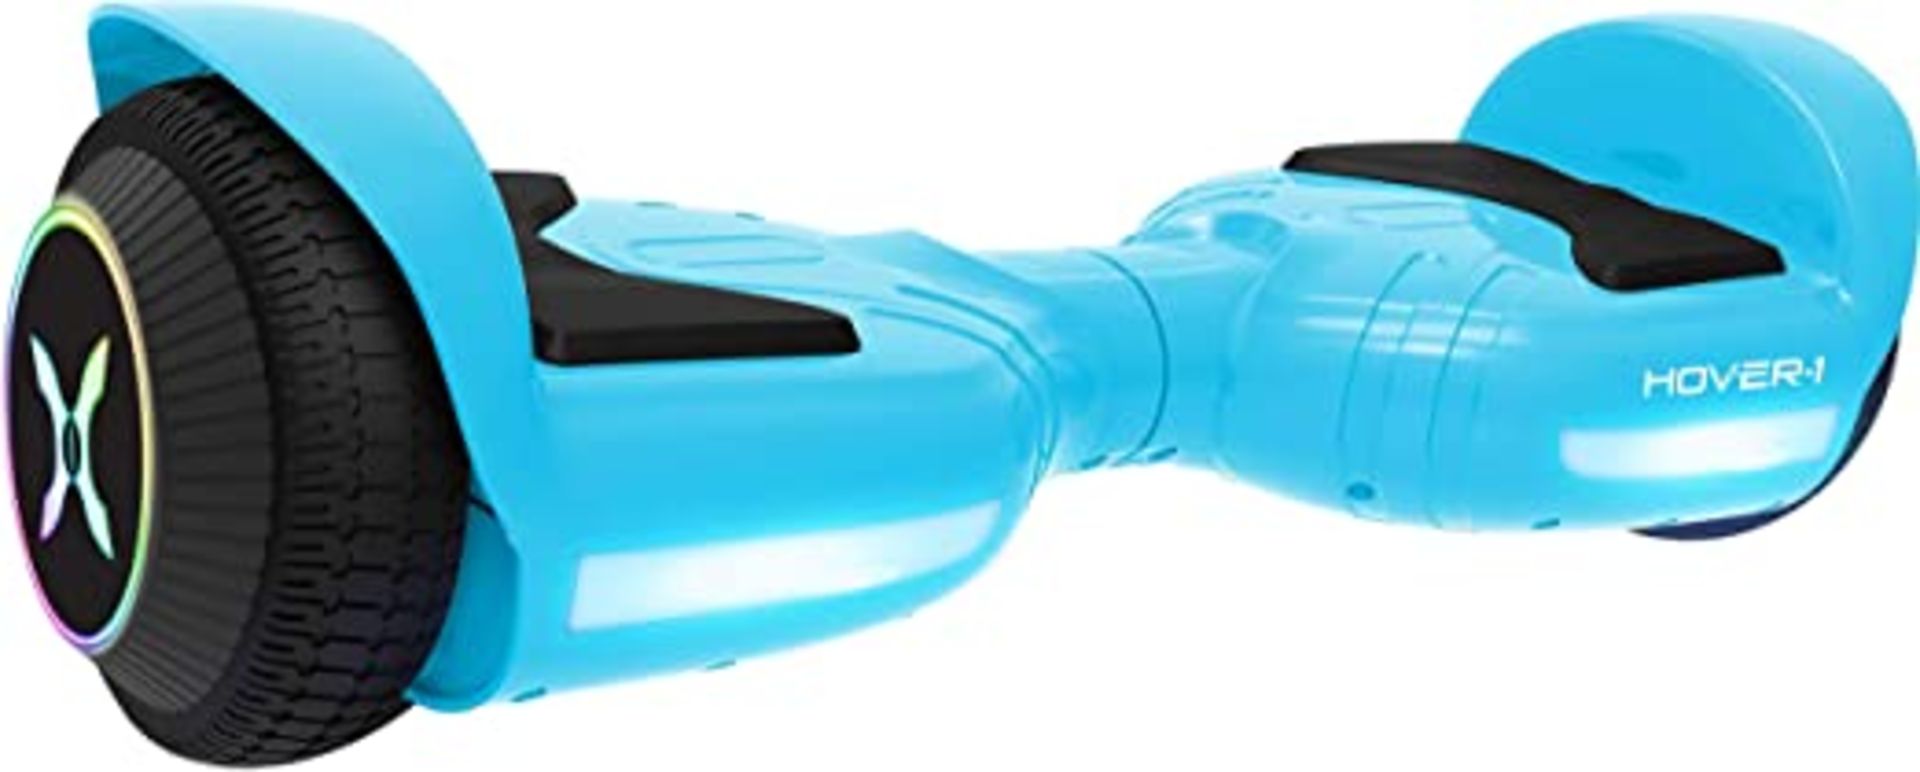 HOVER-1 Rival Hoverboard. Reach top speeds of up to 7mph and a max range of 3 miles on just one full